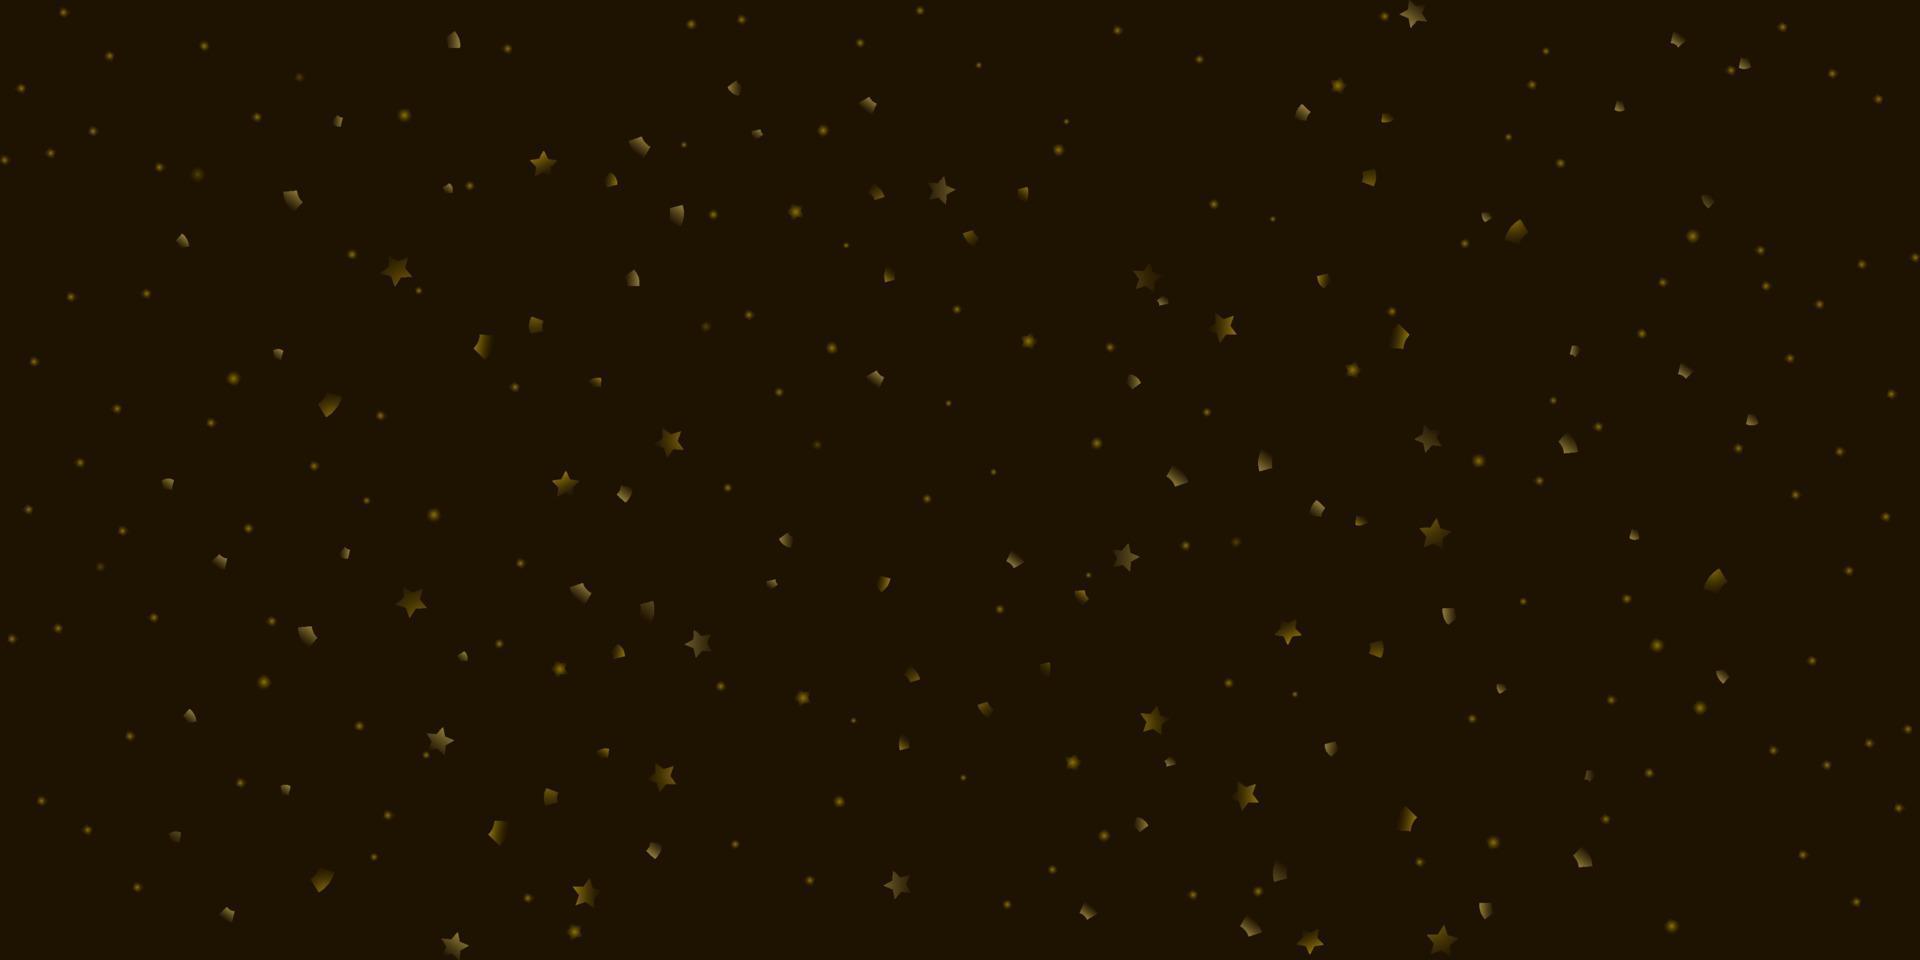 black background with golden confetti, stars and dots vector